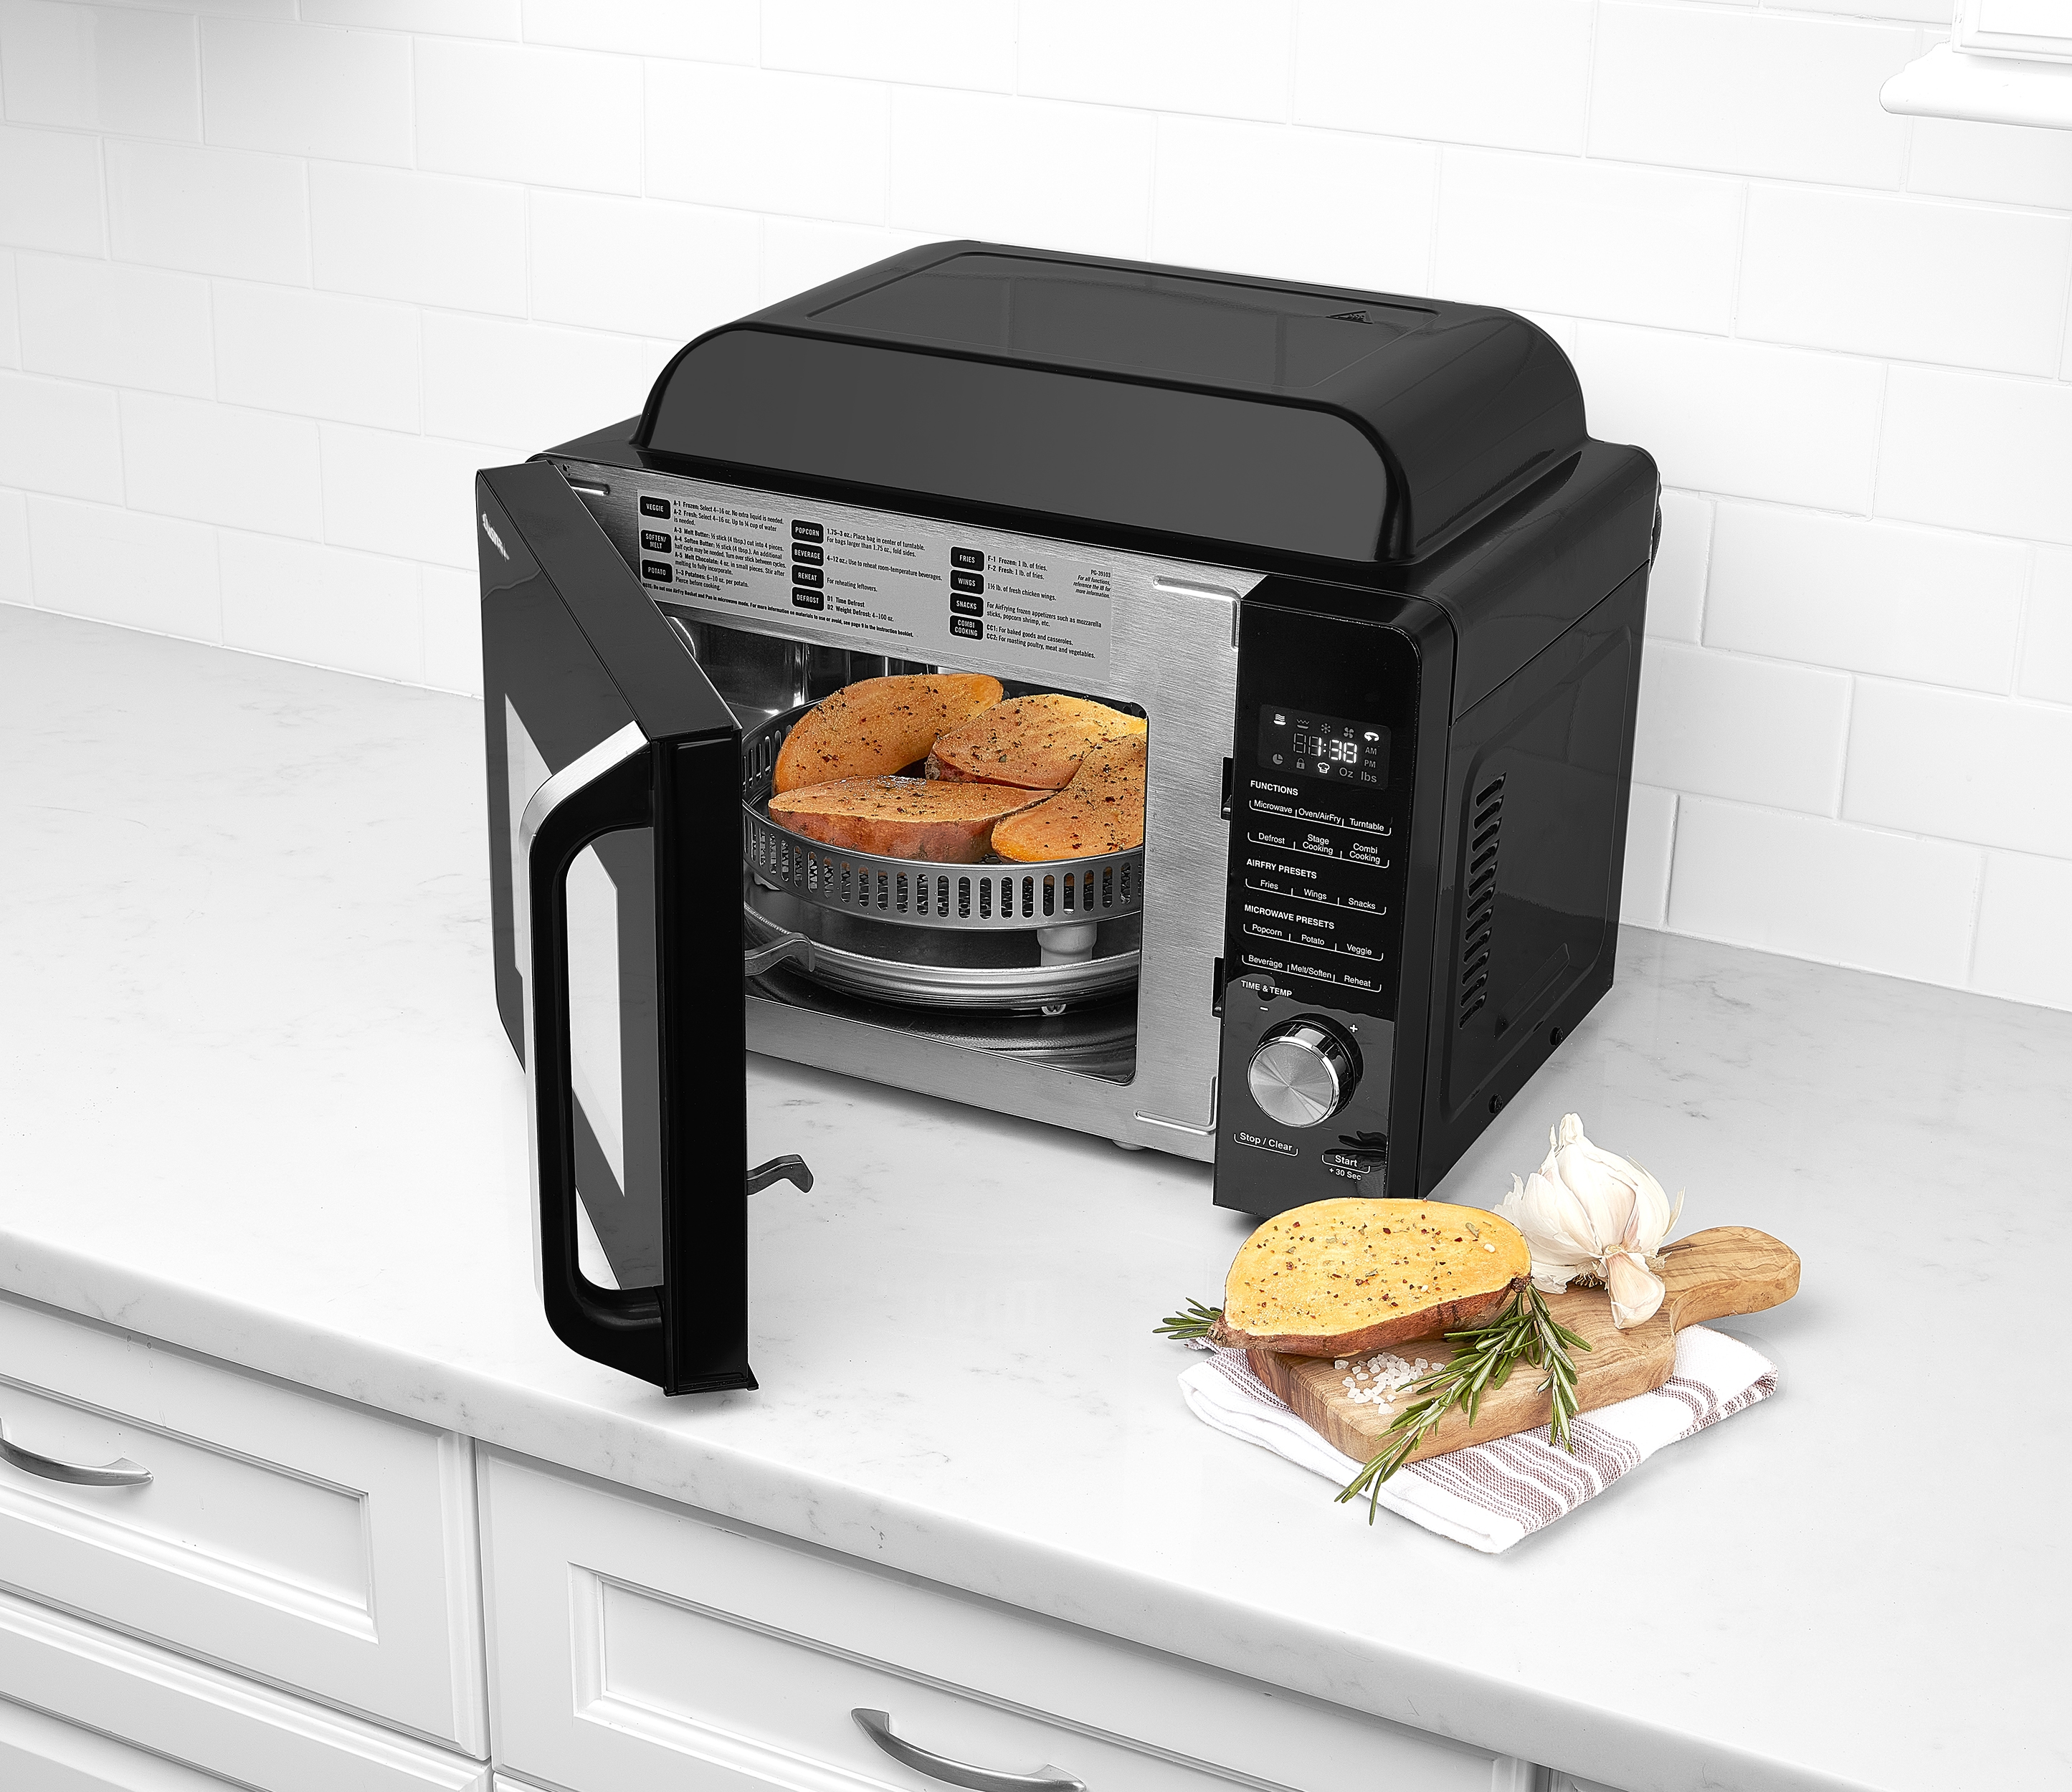 CUISINART 3 IN 1 FOR TRUCKERS! (MICROWAVE, AIRFRYER & OVEN) 